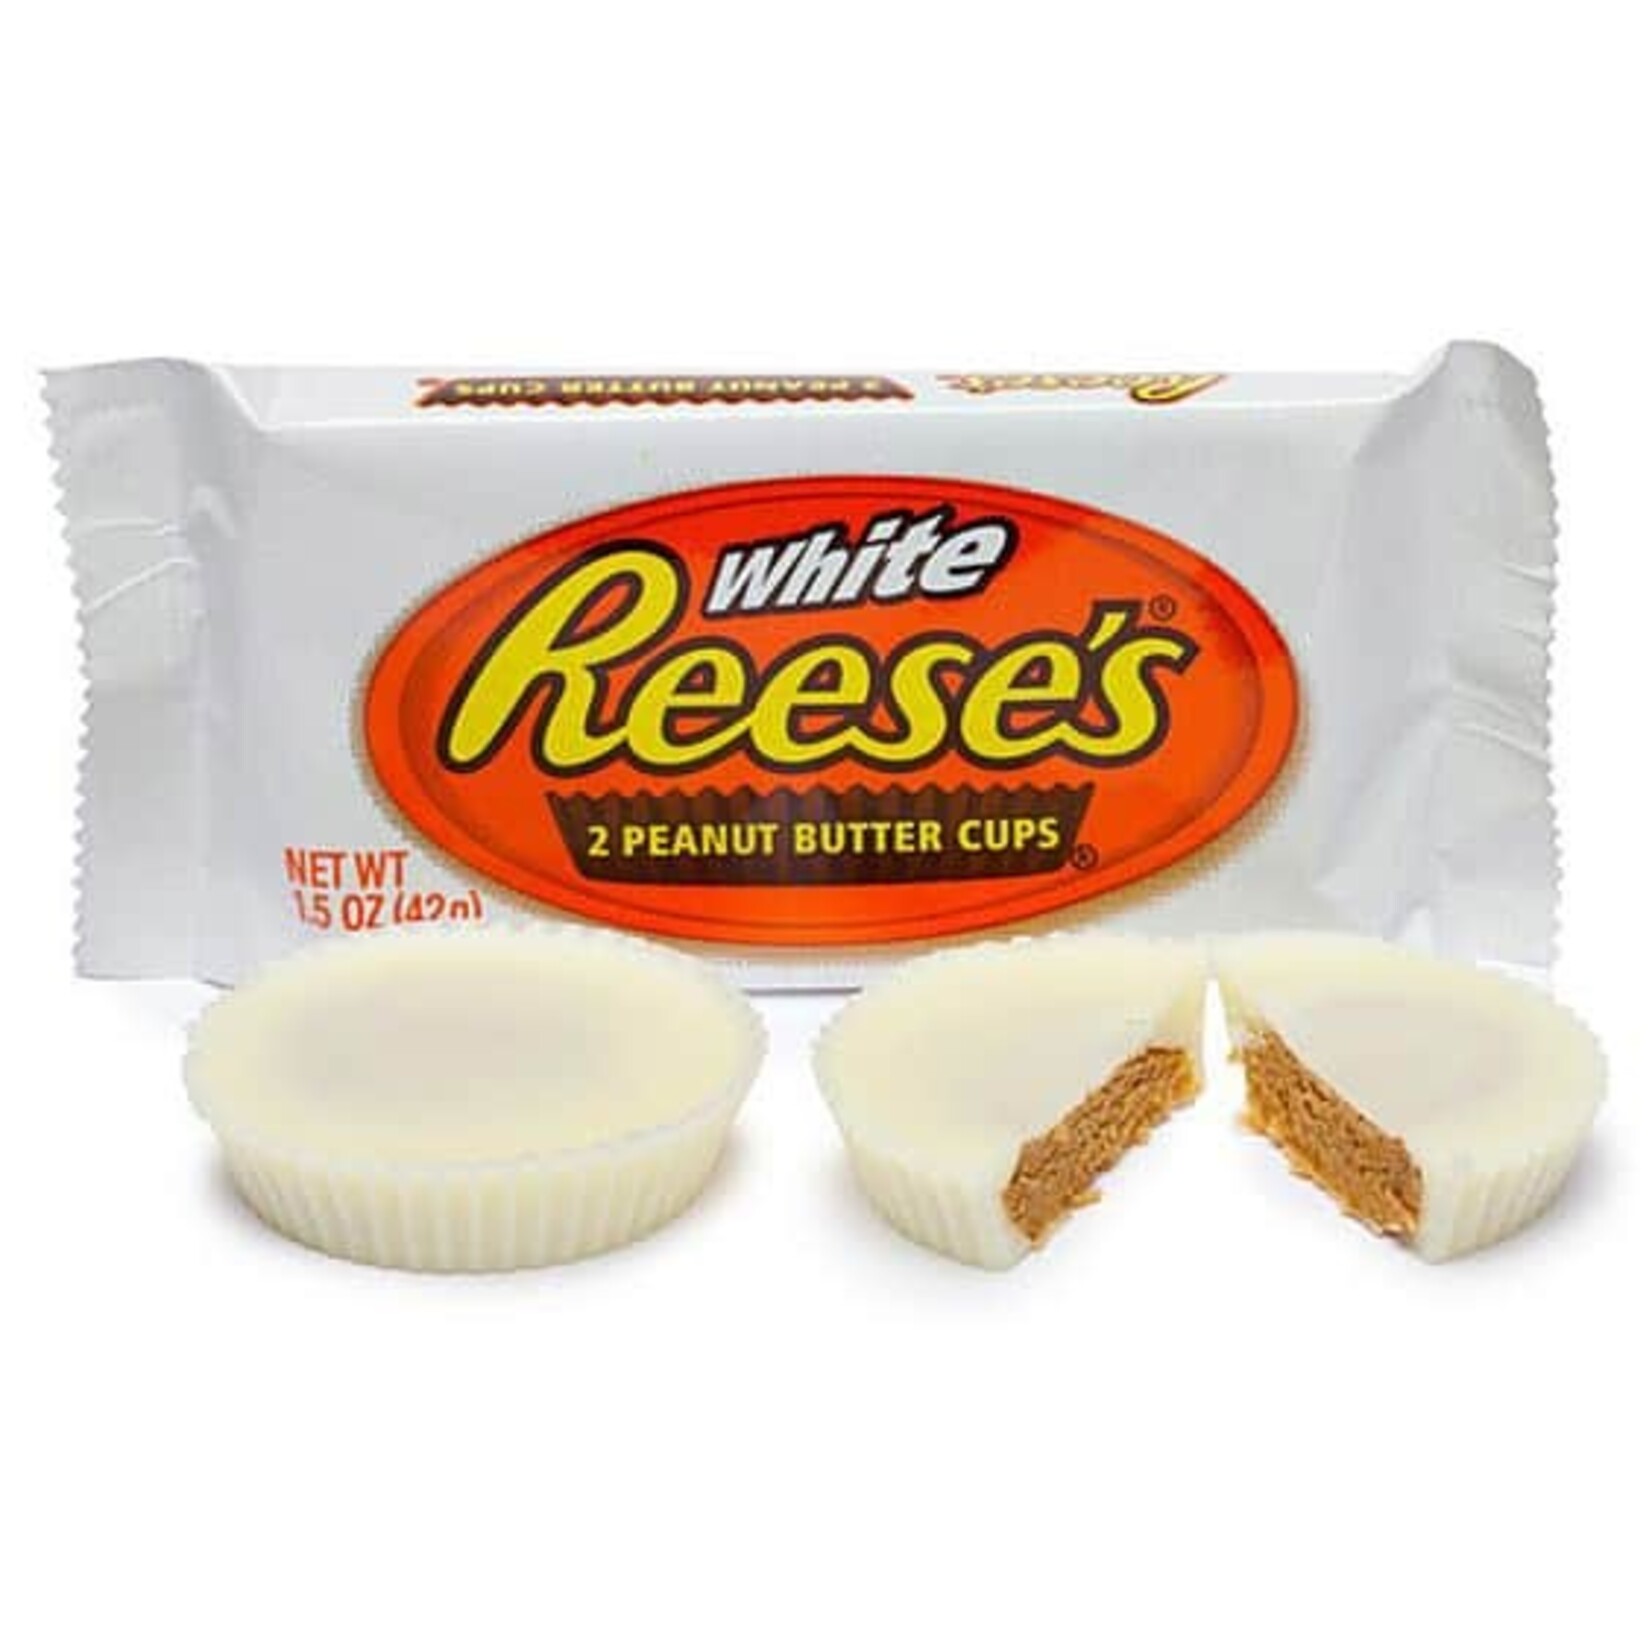 Reese's White Peanut Butter Cup